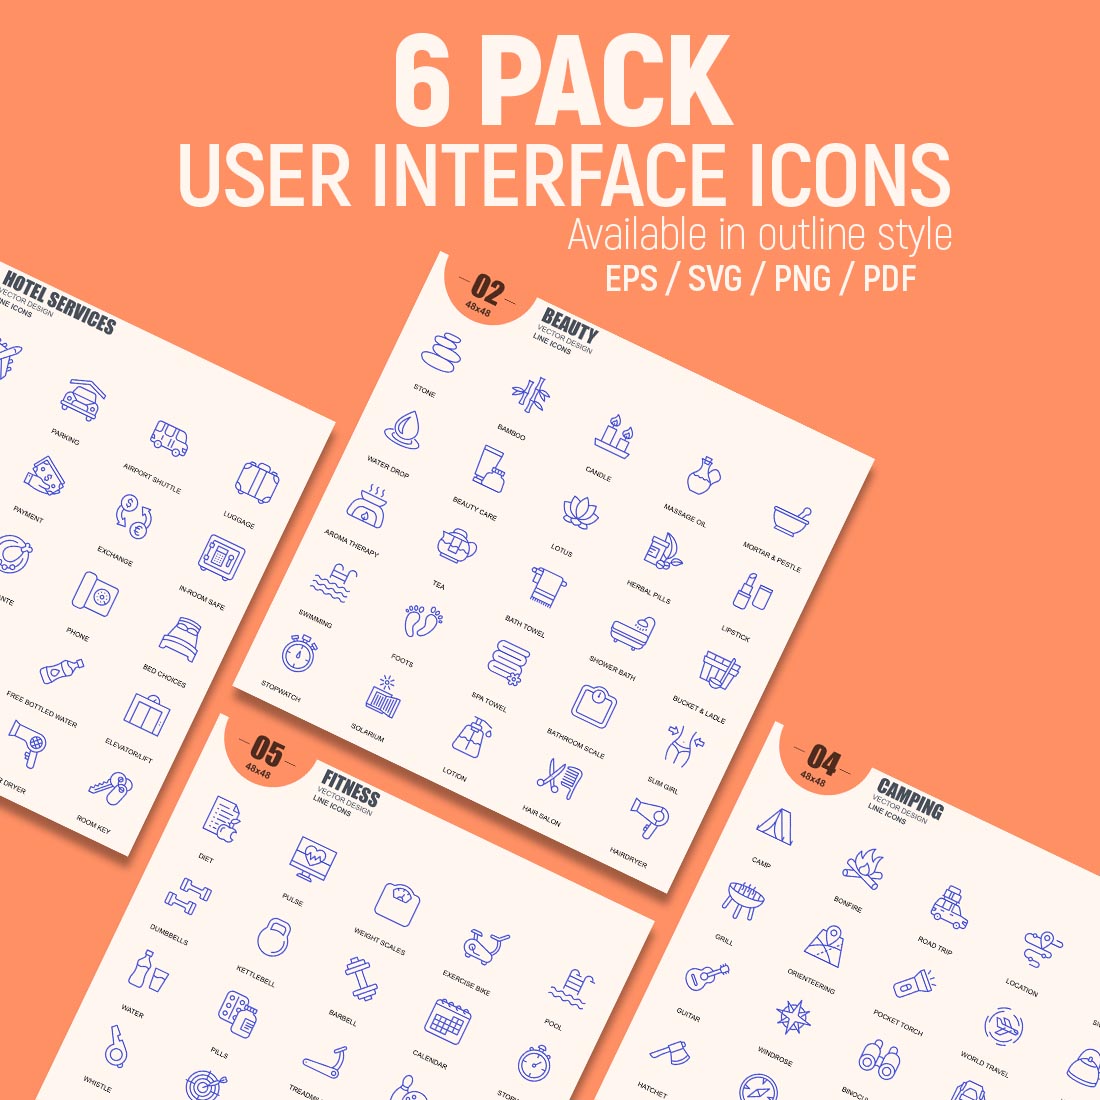 User Interface Icon Set Outline 6 Pack cover image.